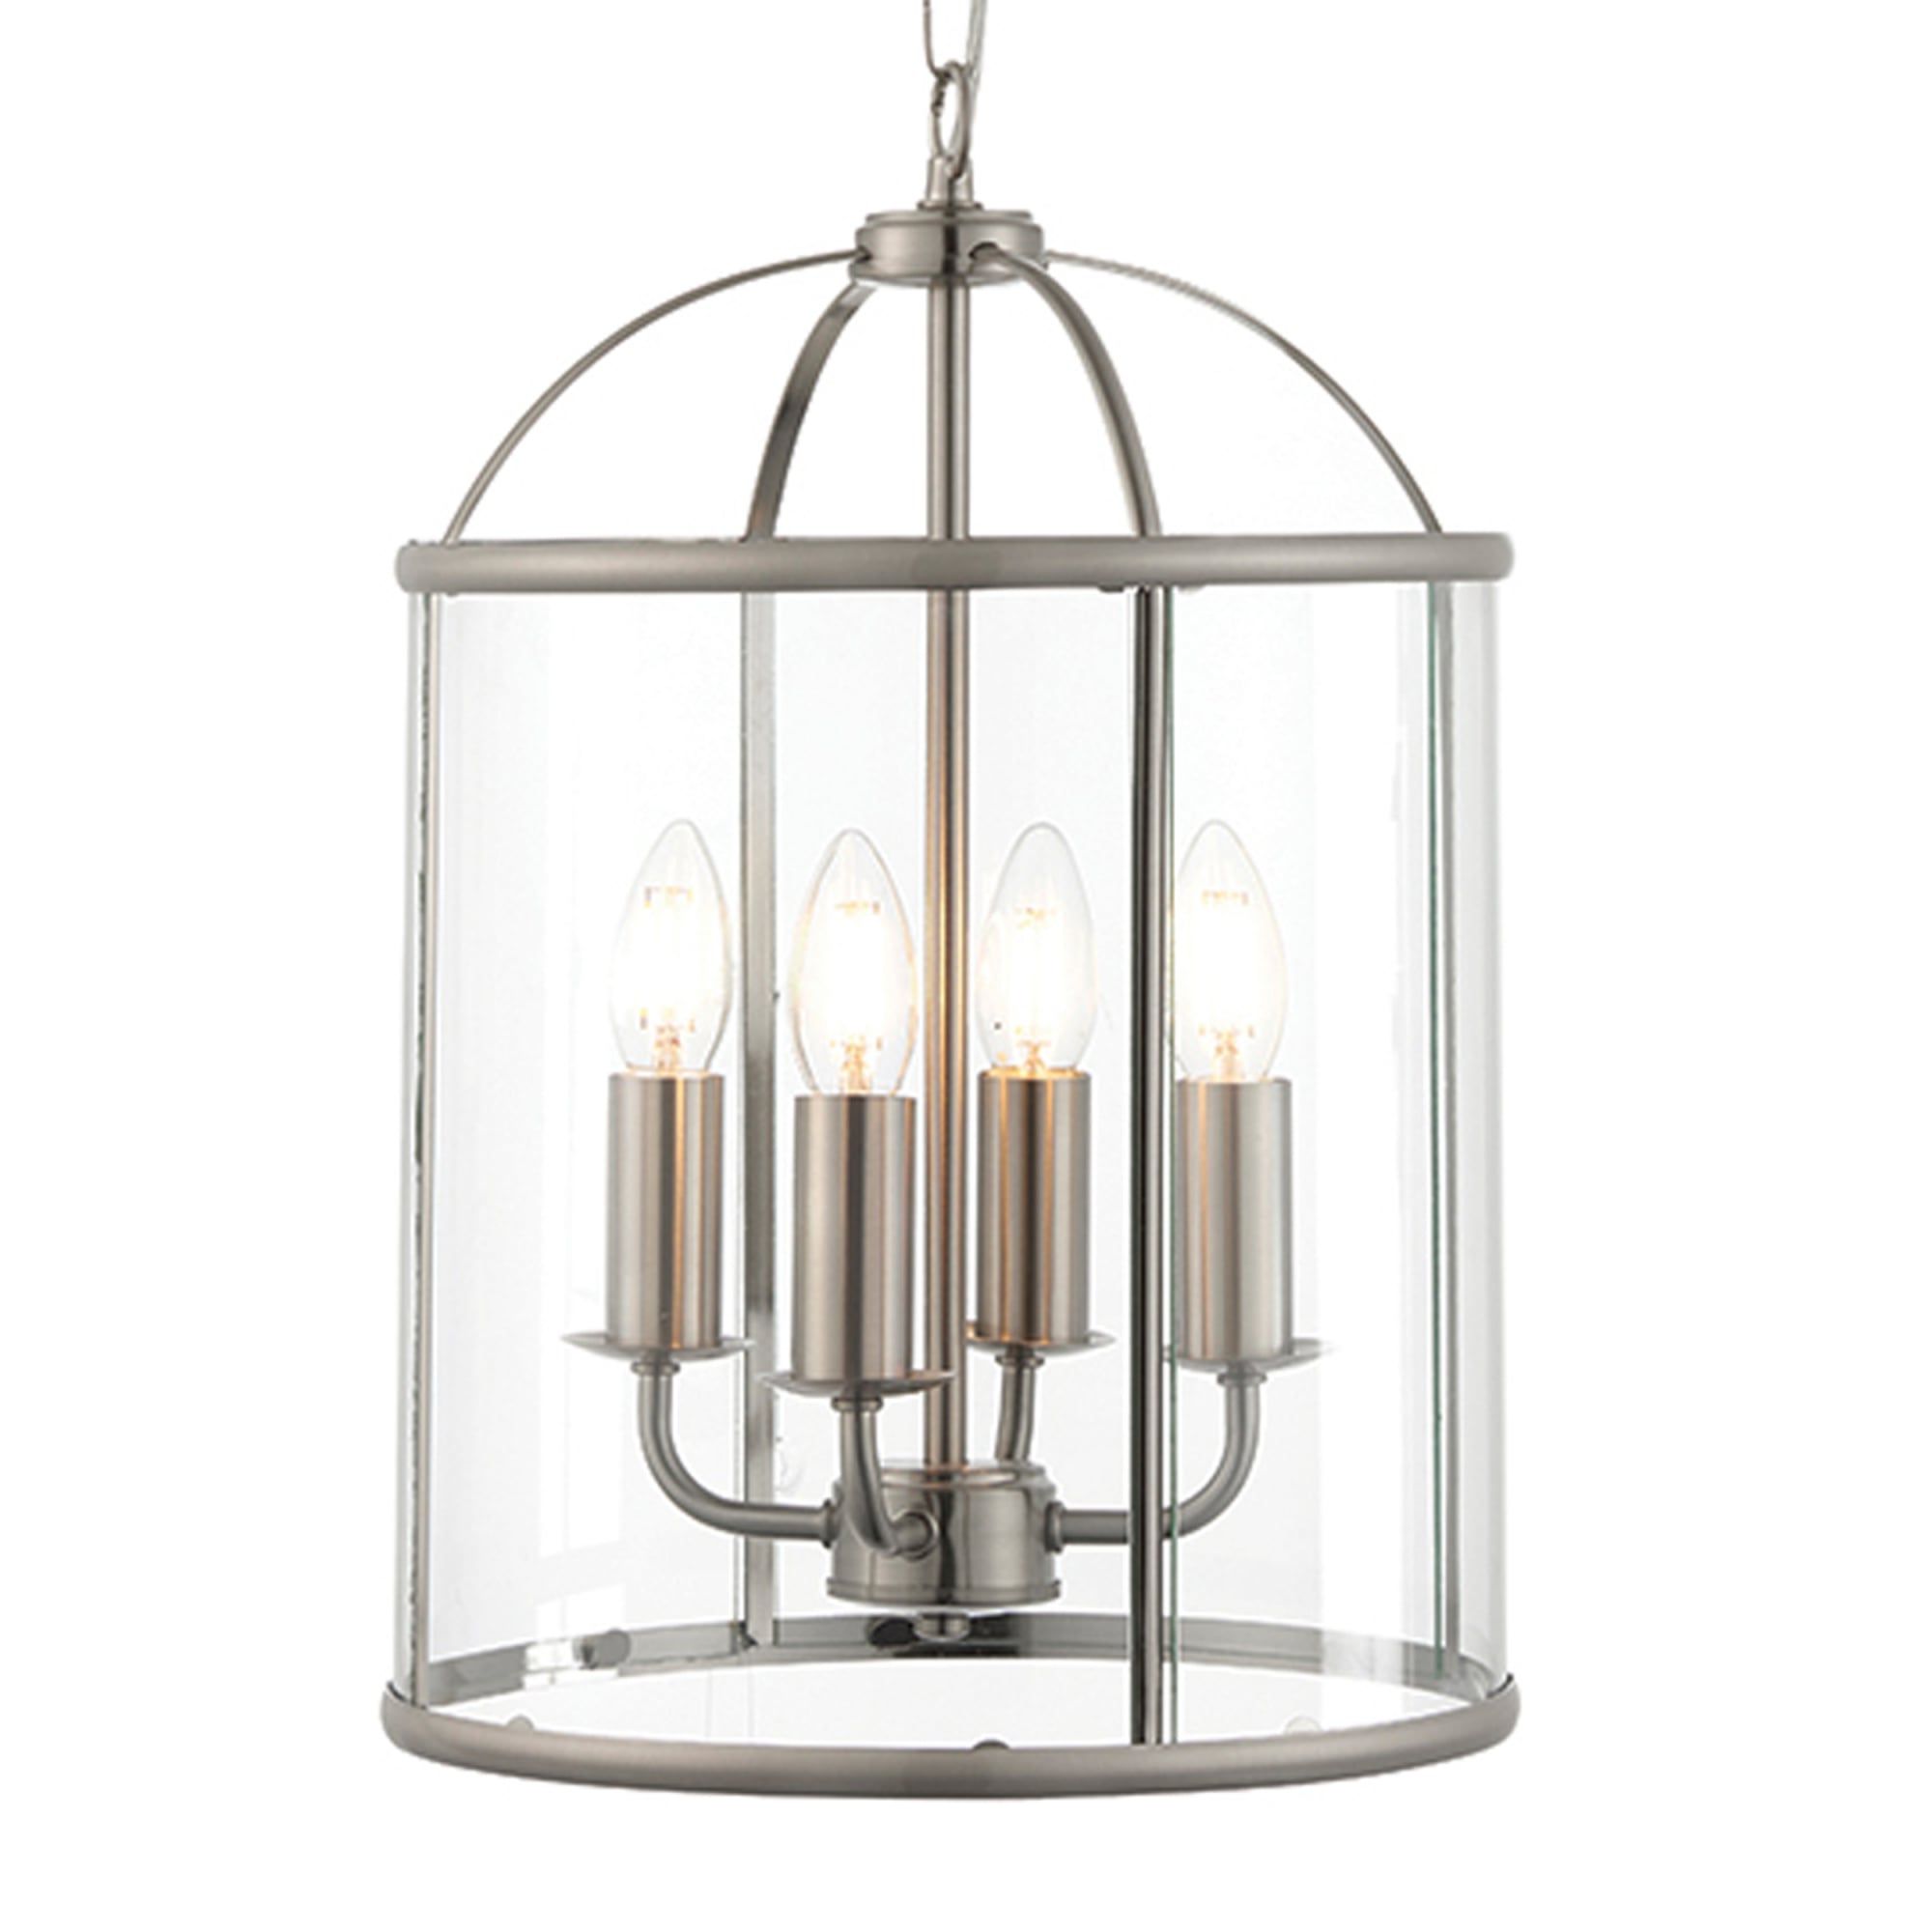 Trendy Endon 70324 Lambeth 4 Light Satin Nickel And Glass Lantern Pendant Intended For Satin Nickel Lantern Chandeliers (View 3 of 15)